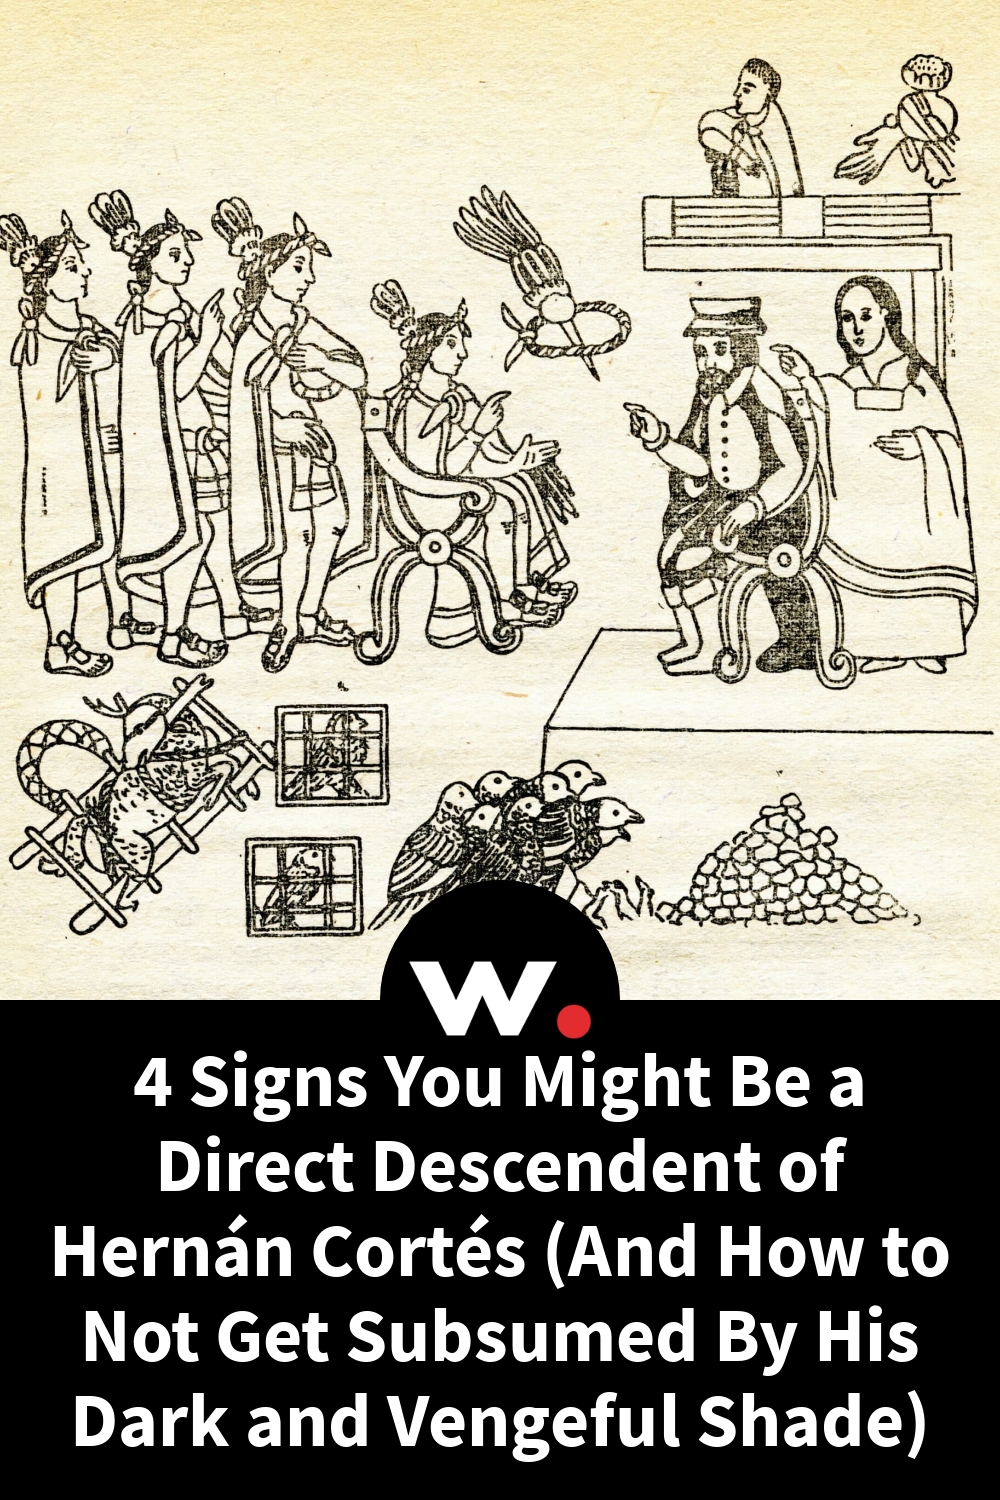 4 Signs You Might Be a Direct Descendent of Hernán Cortés (And How to Not Get Subsumed By His Dark and Vengeful Shade)